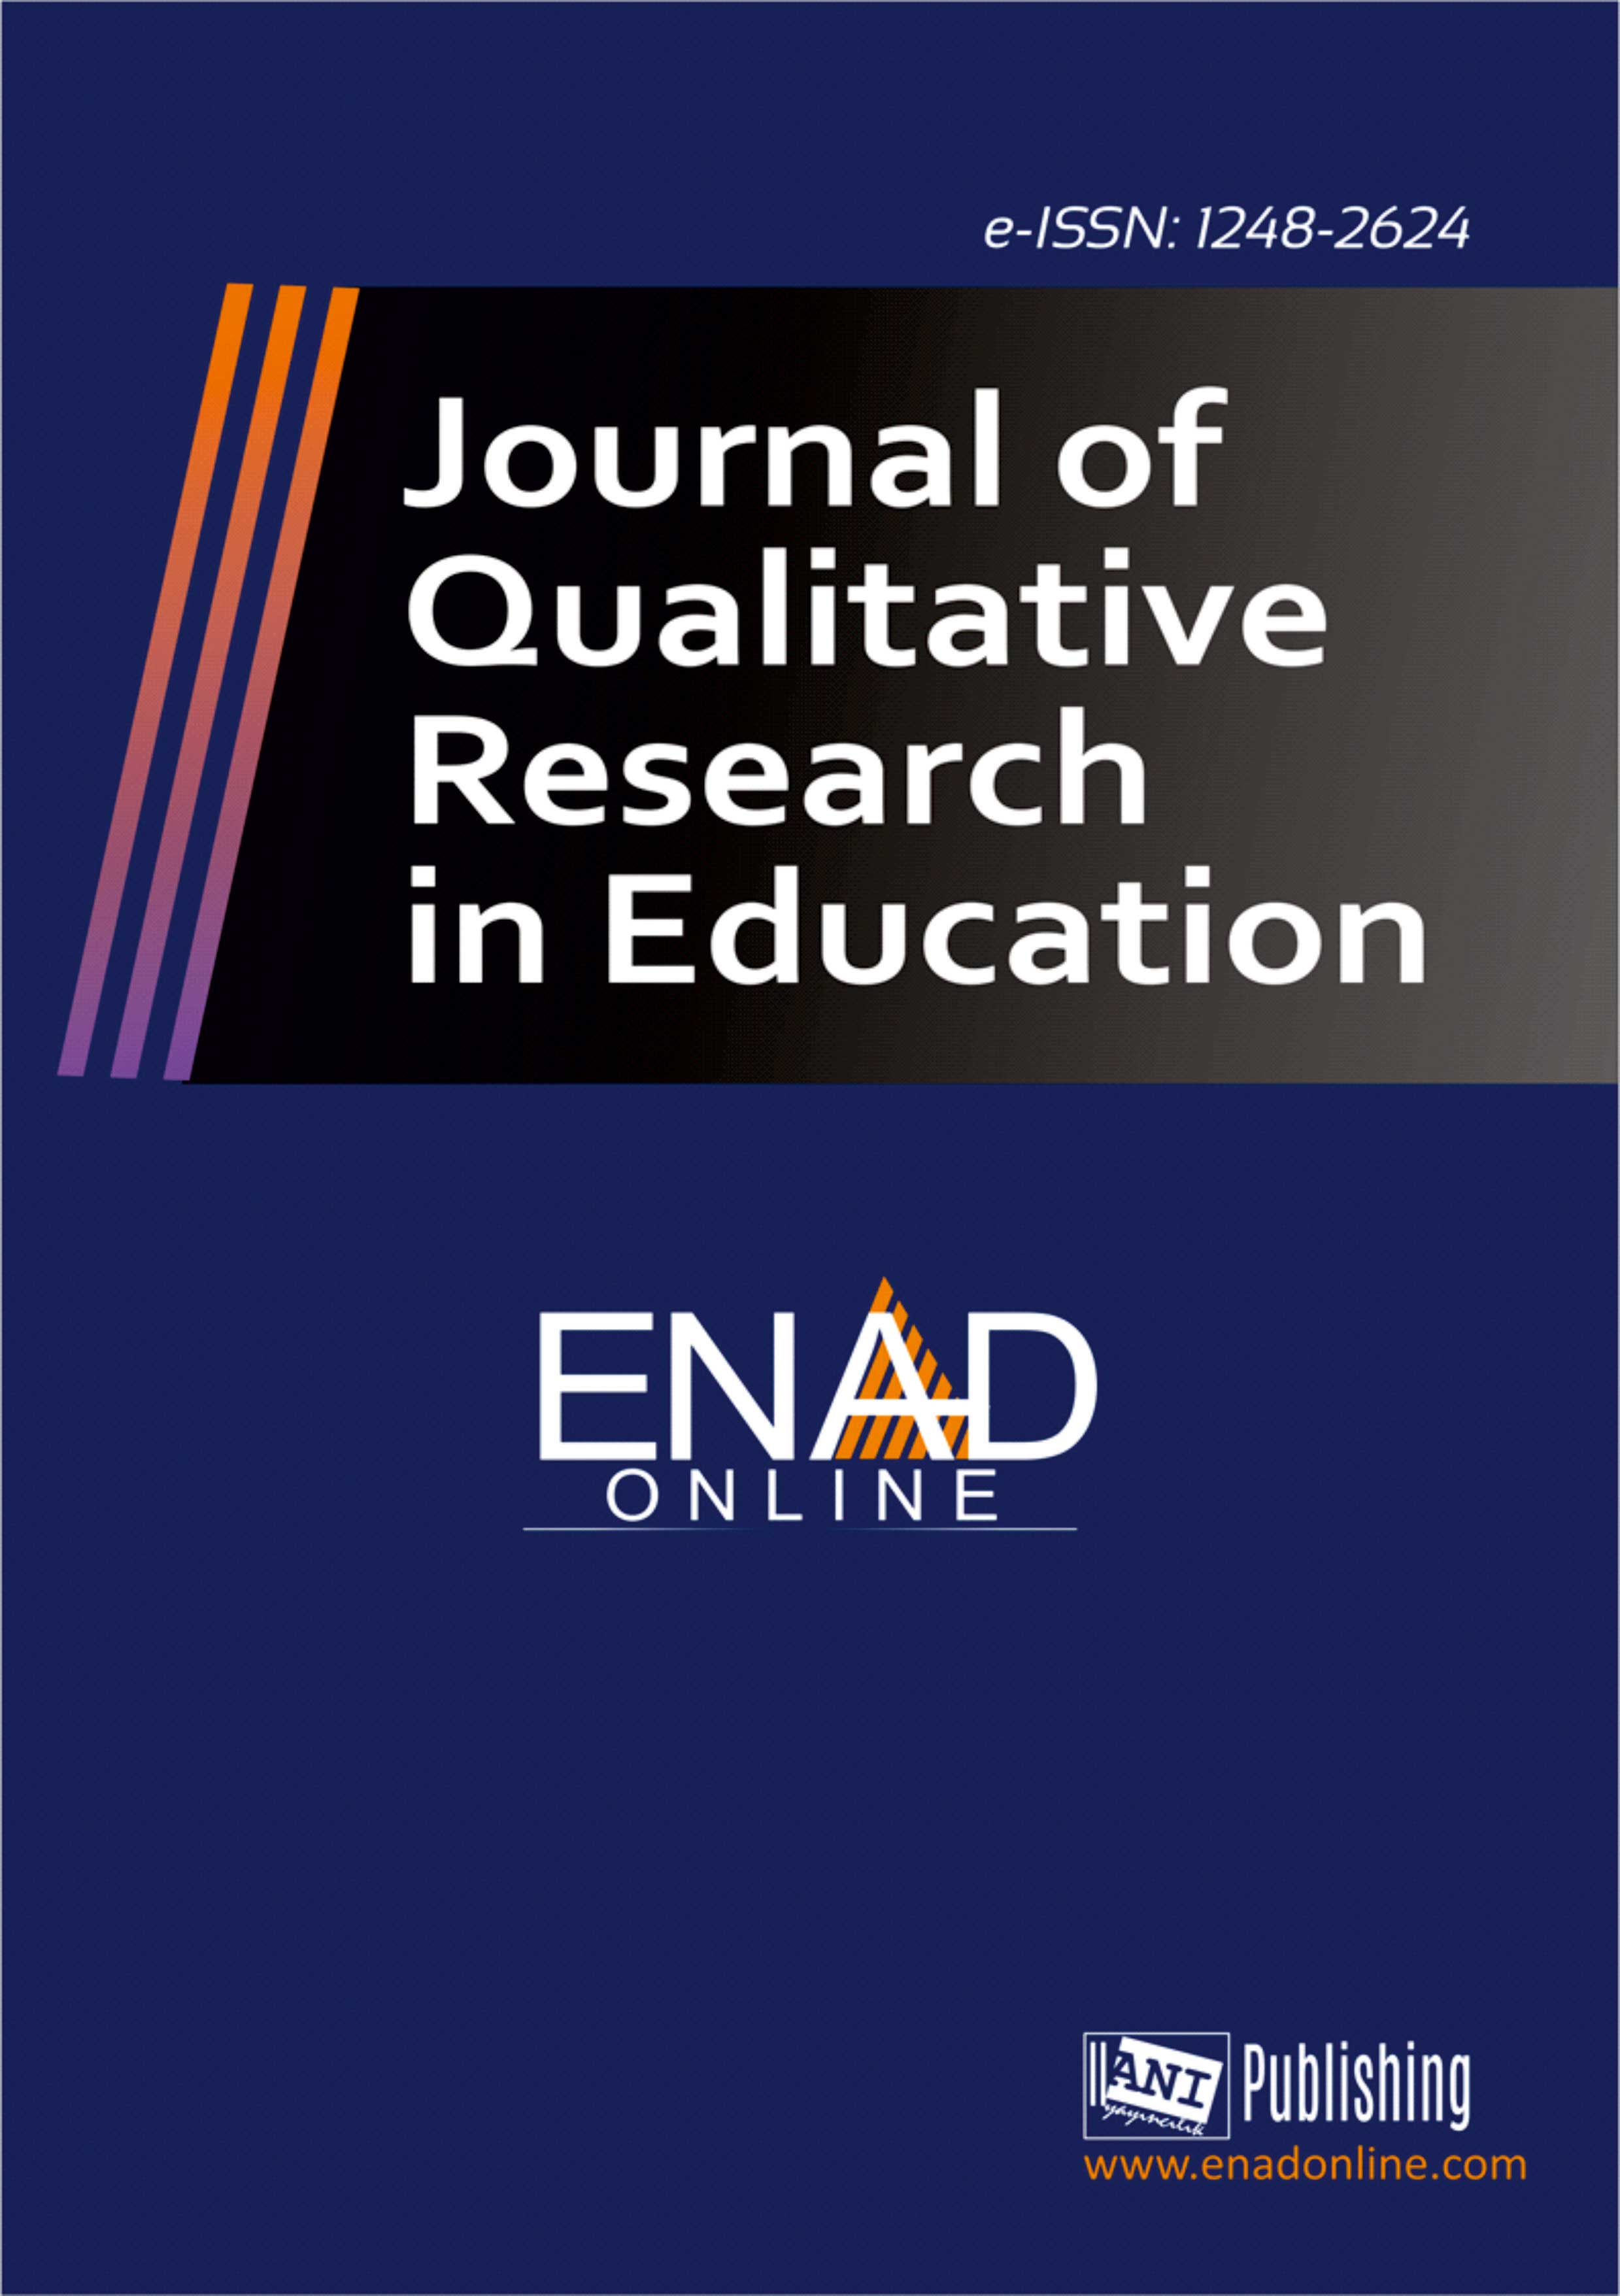 					View Vol. 8 Issue 2 (2020): Journal of Qualitative Research in Education
				